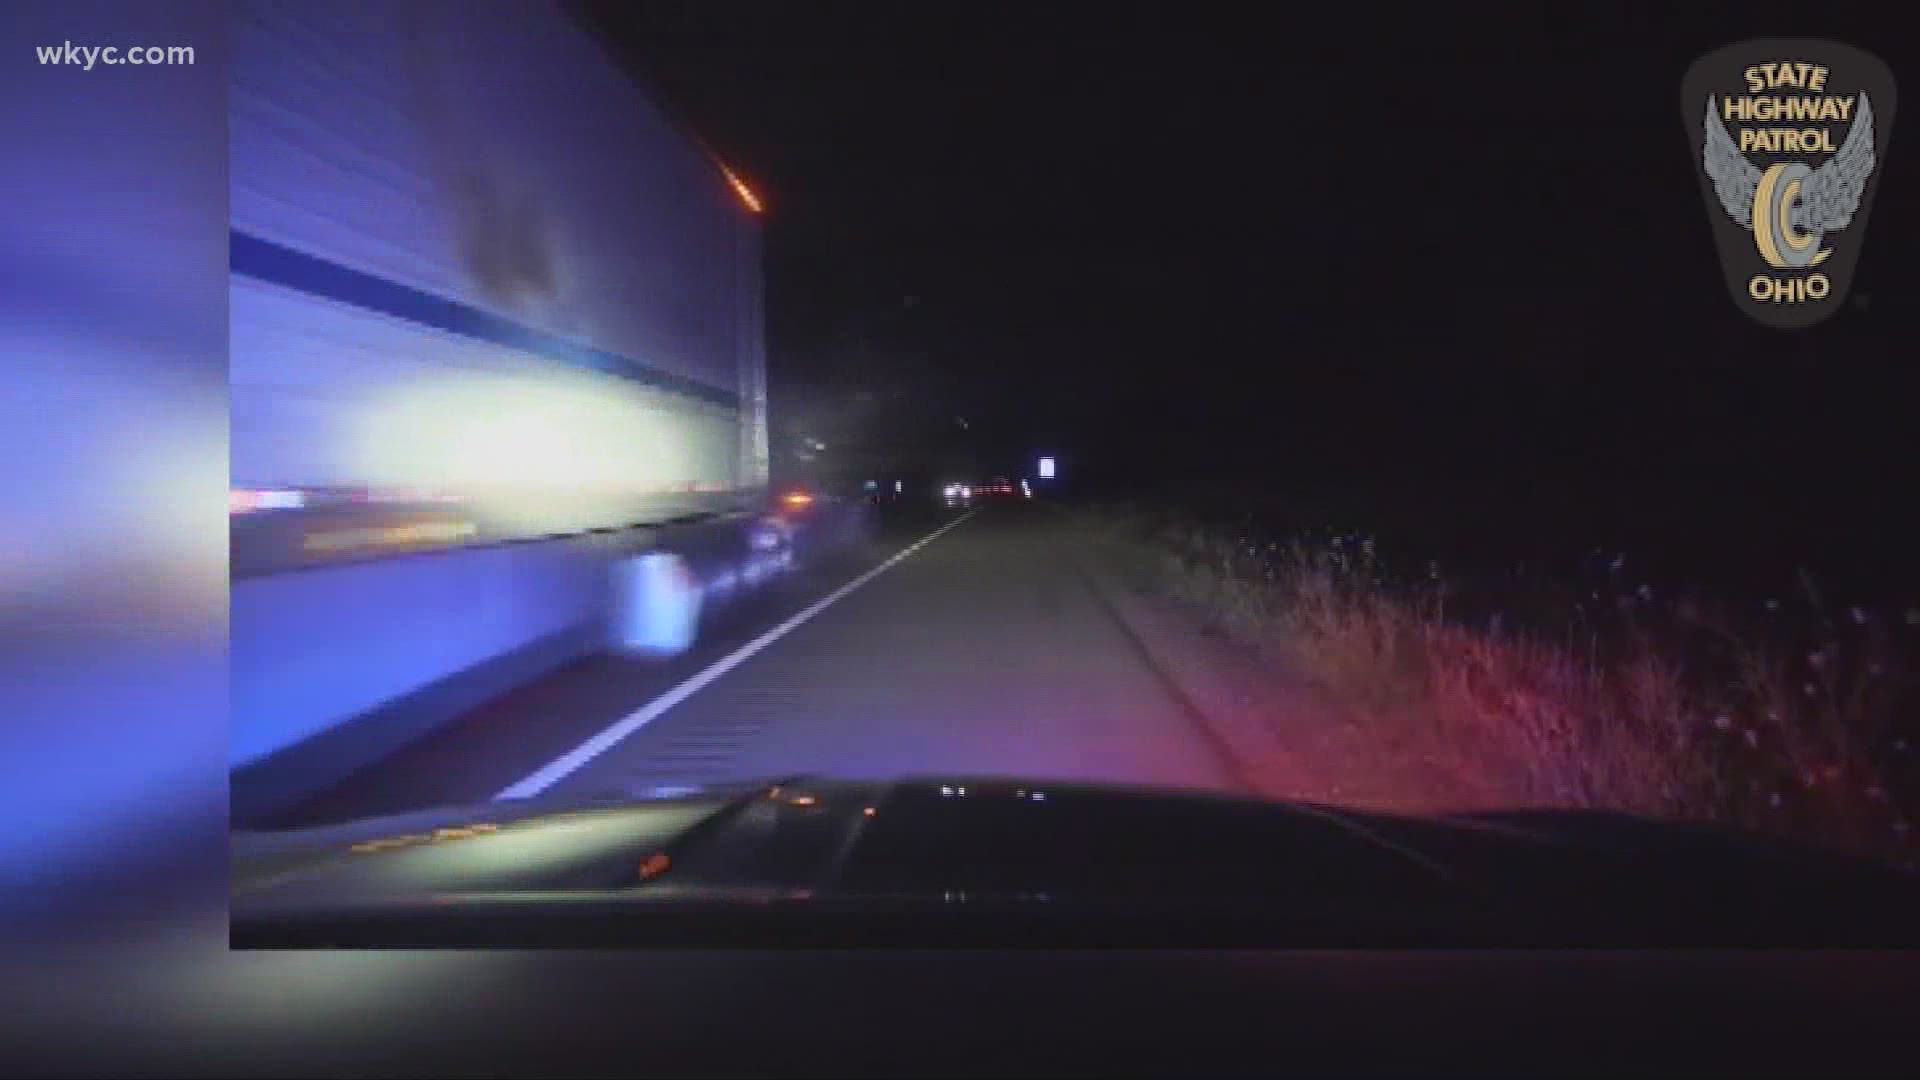 Dash cam footage from the OSHP shows the moment a semi truck slammed into an SUV that had stopped in the road, after being pulled over. Four people died in the crash